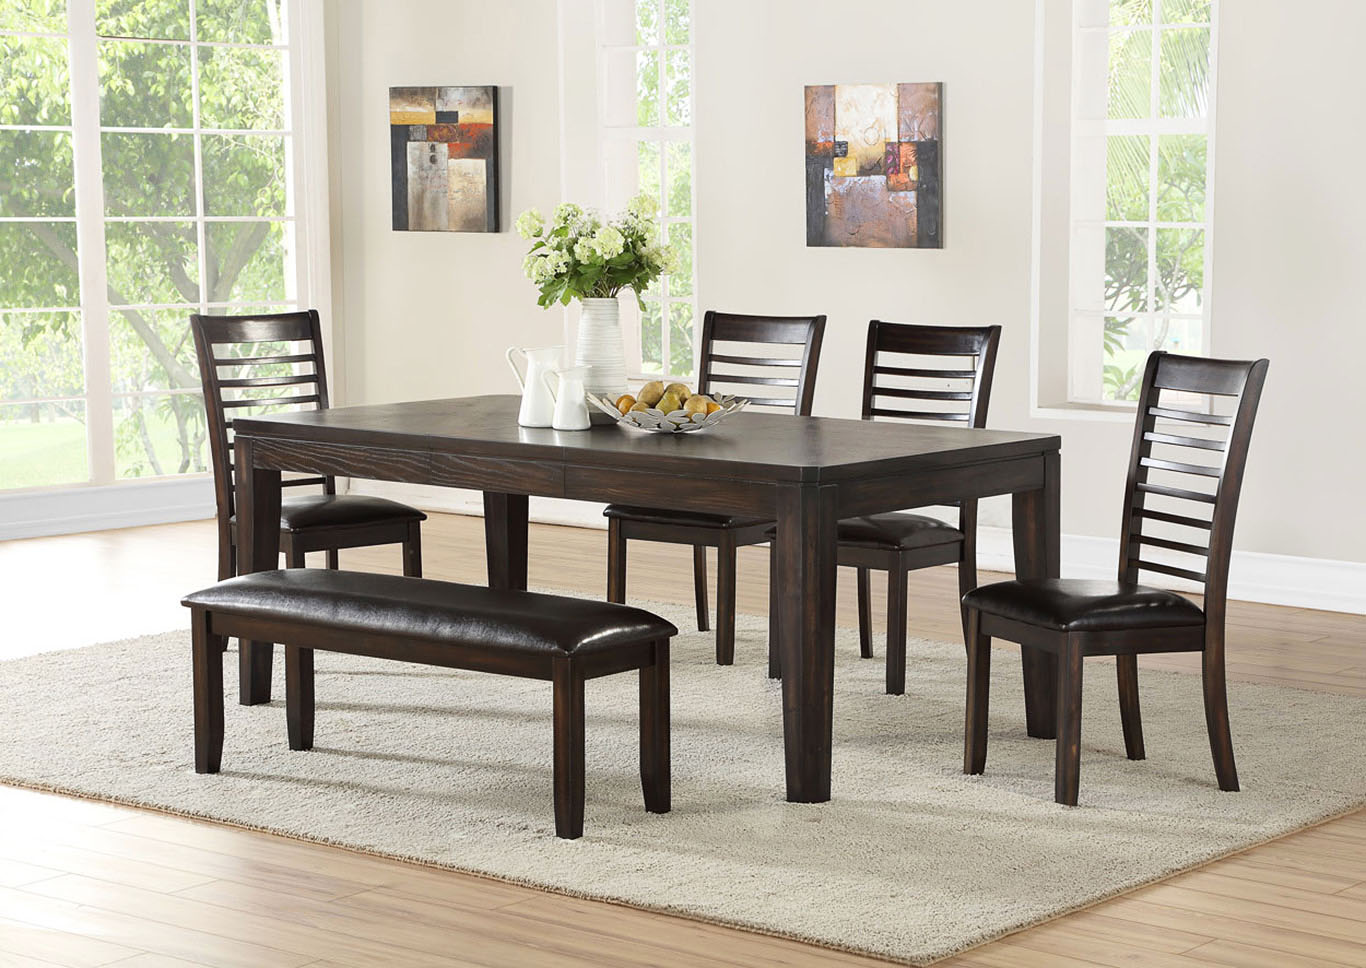 Ally Brown Dining Set W/ 4 Chairs & Bench